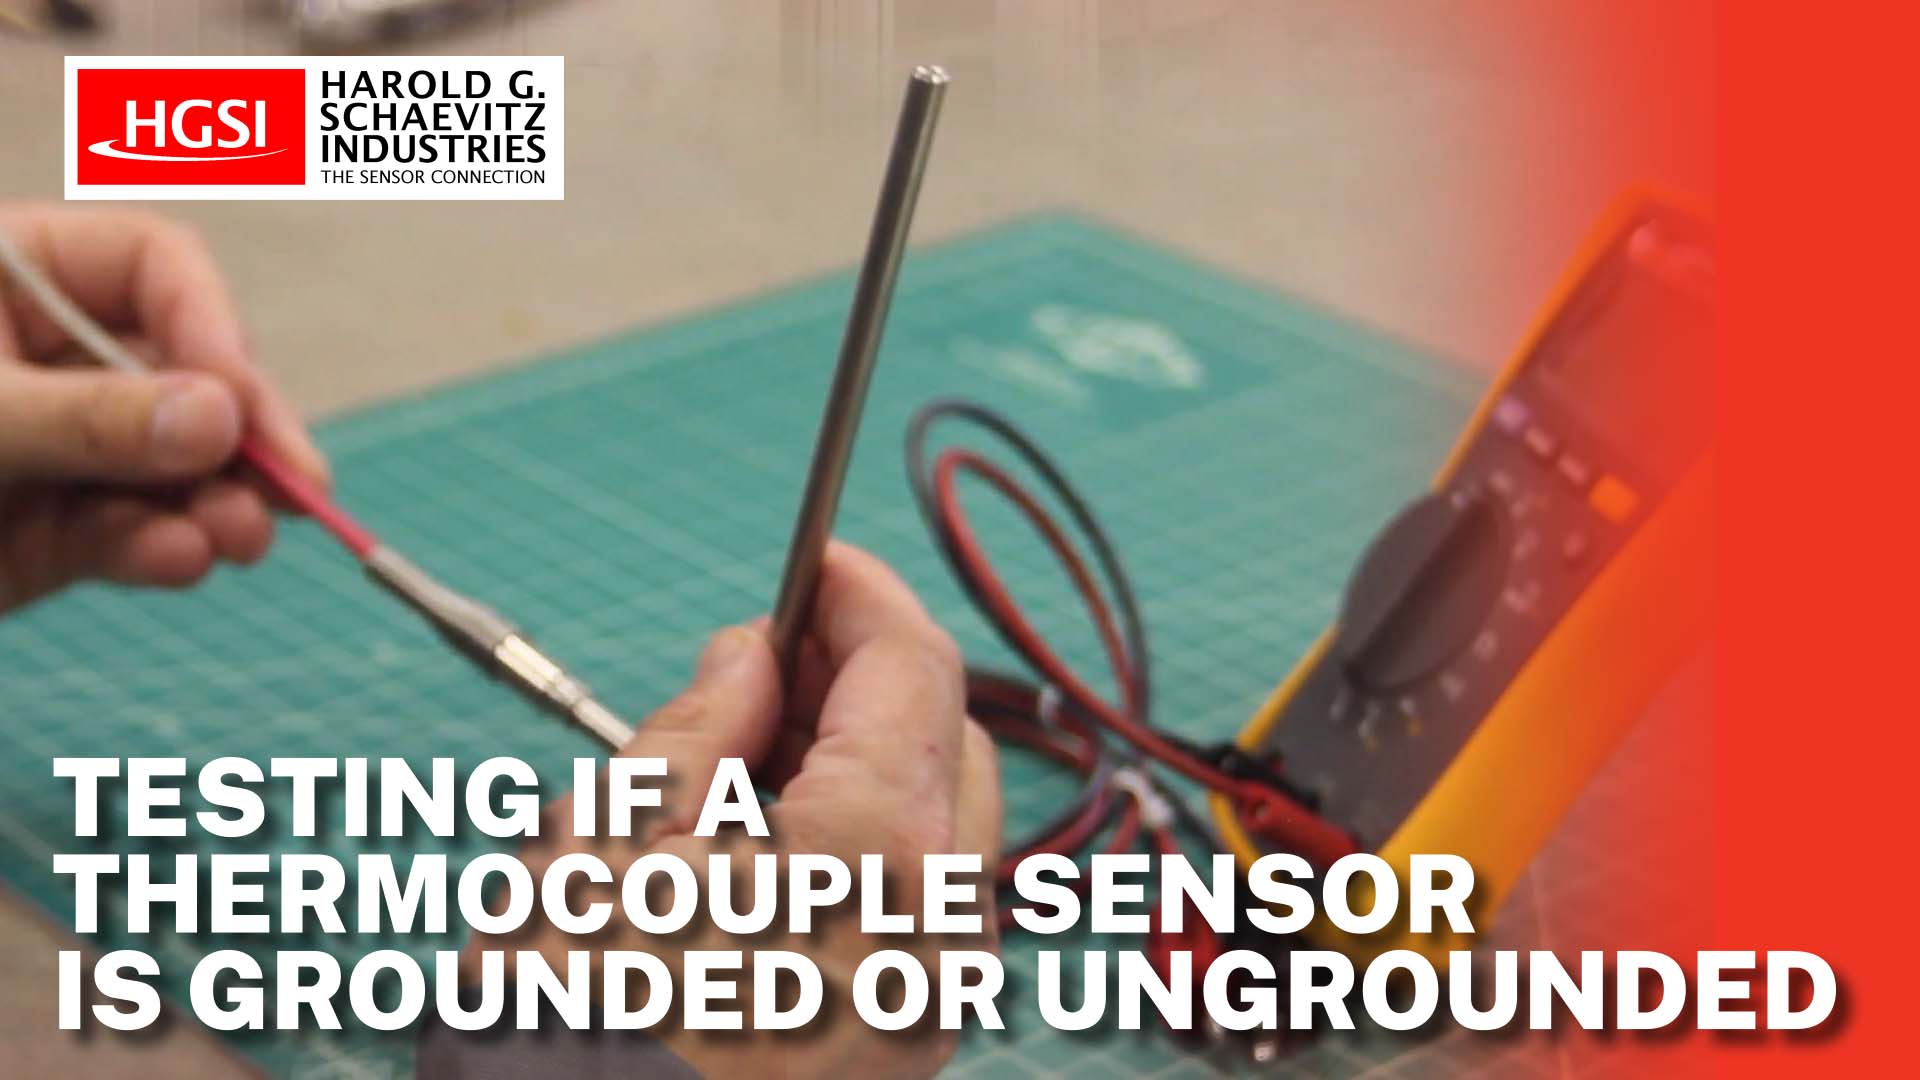 How To Test If A Thermocouple Is Grounded or Ungrounded